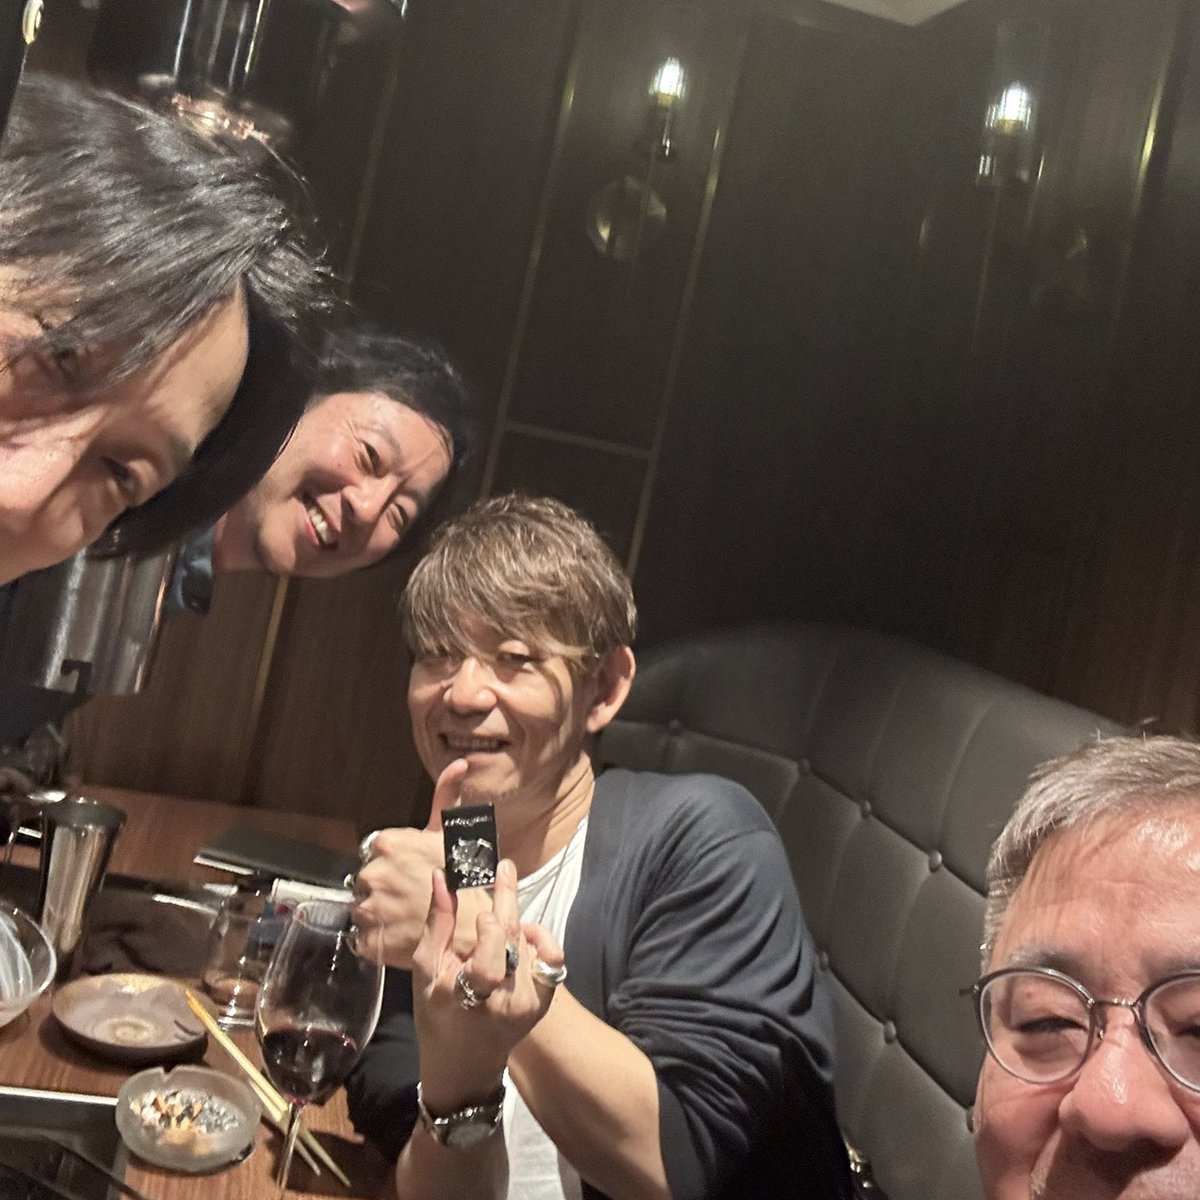 Yoshi-P (FF14/FF16), Yosuke Saito (NieR), Tomoya Asano (Team Asano) and Takeshi Nozue (Advent Children/ Kingslaive) get together for Yoshi-P’s birthday! 

They are all now Executive Officers at Square Enix! Saito refers to a “new Square Enix” and says they will do their best!